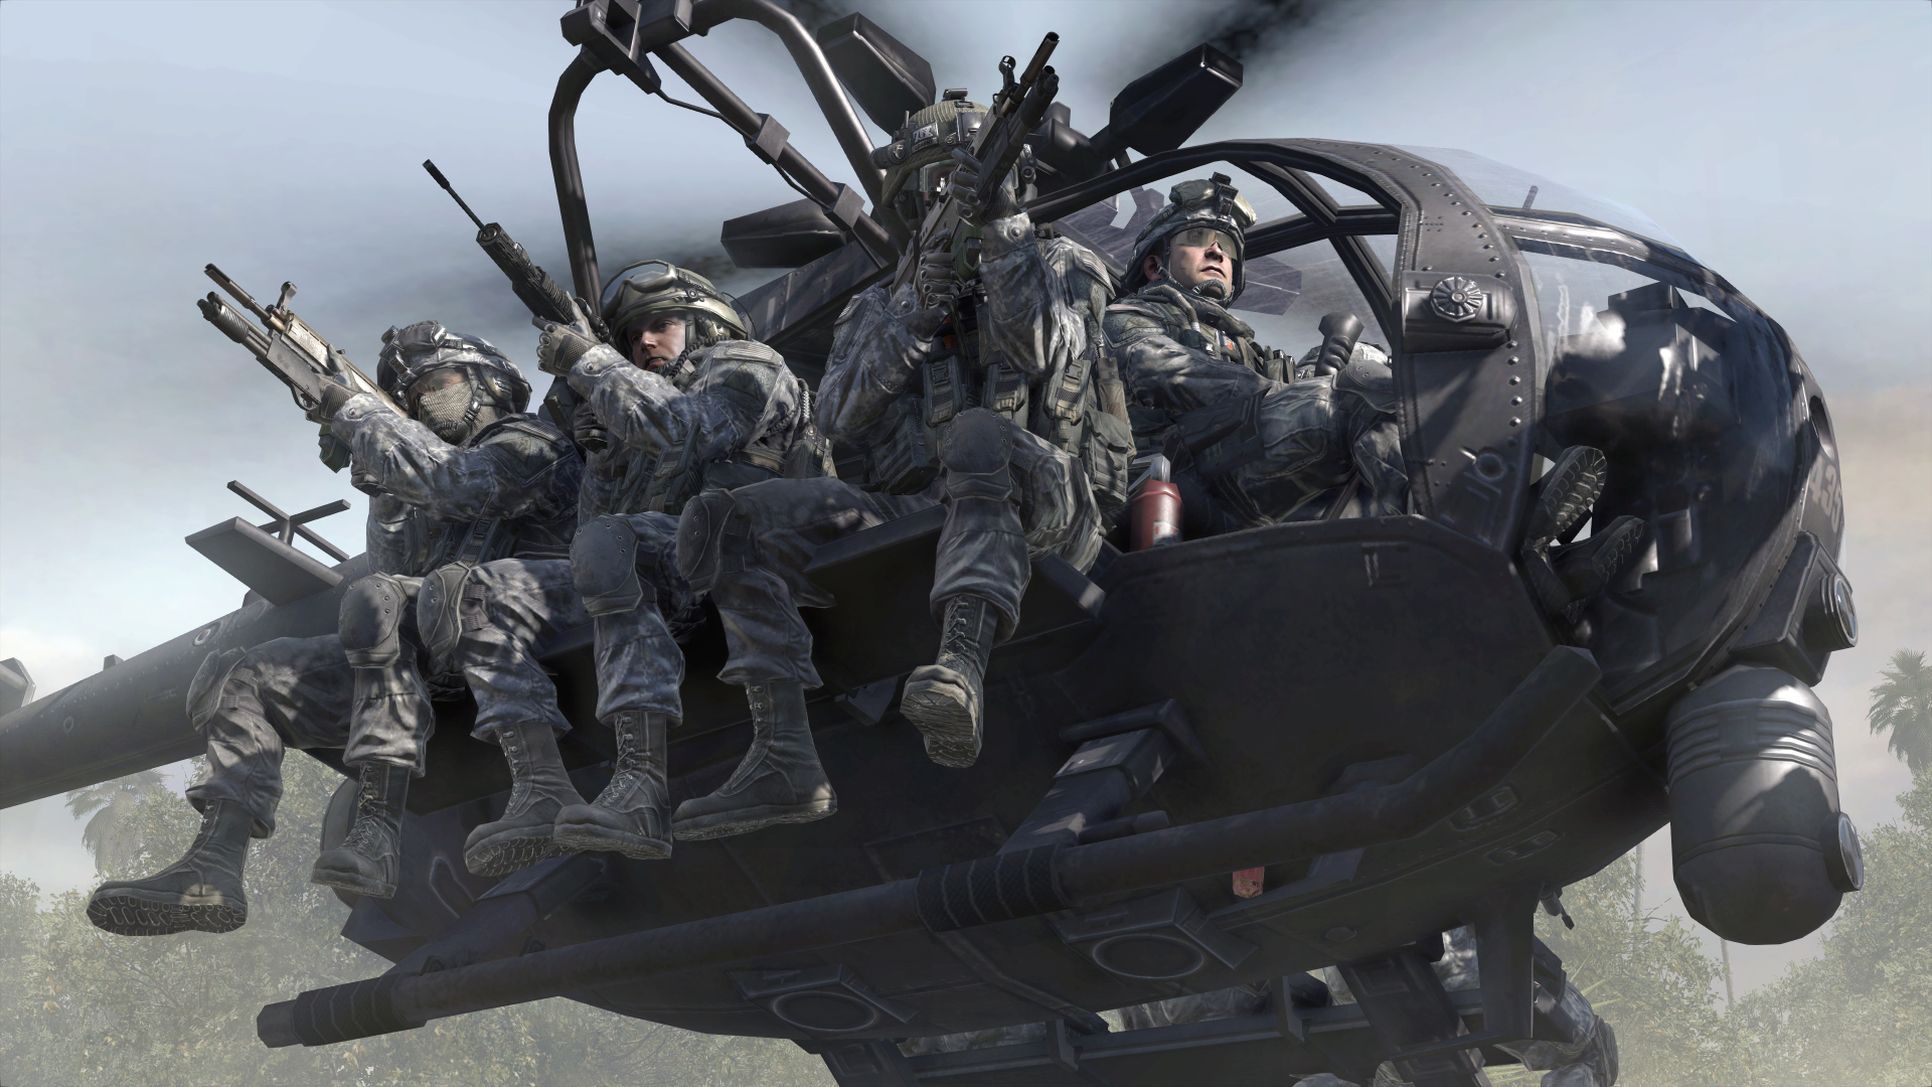 DET - The Art Of Gaming. Army rangers, Modern warfare, Little bird helicopter